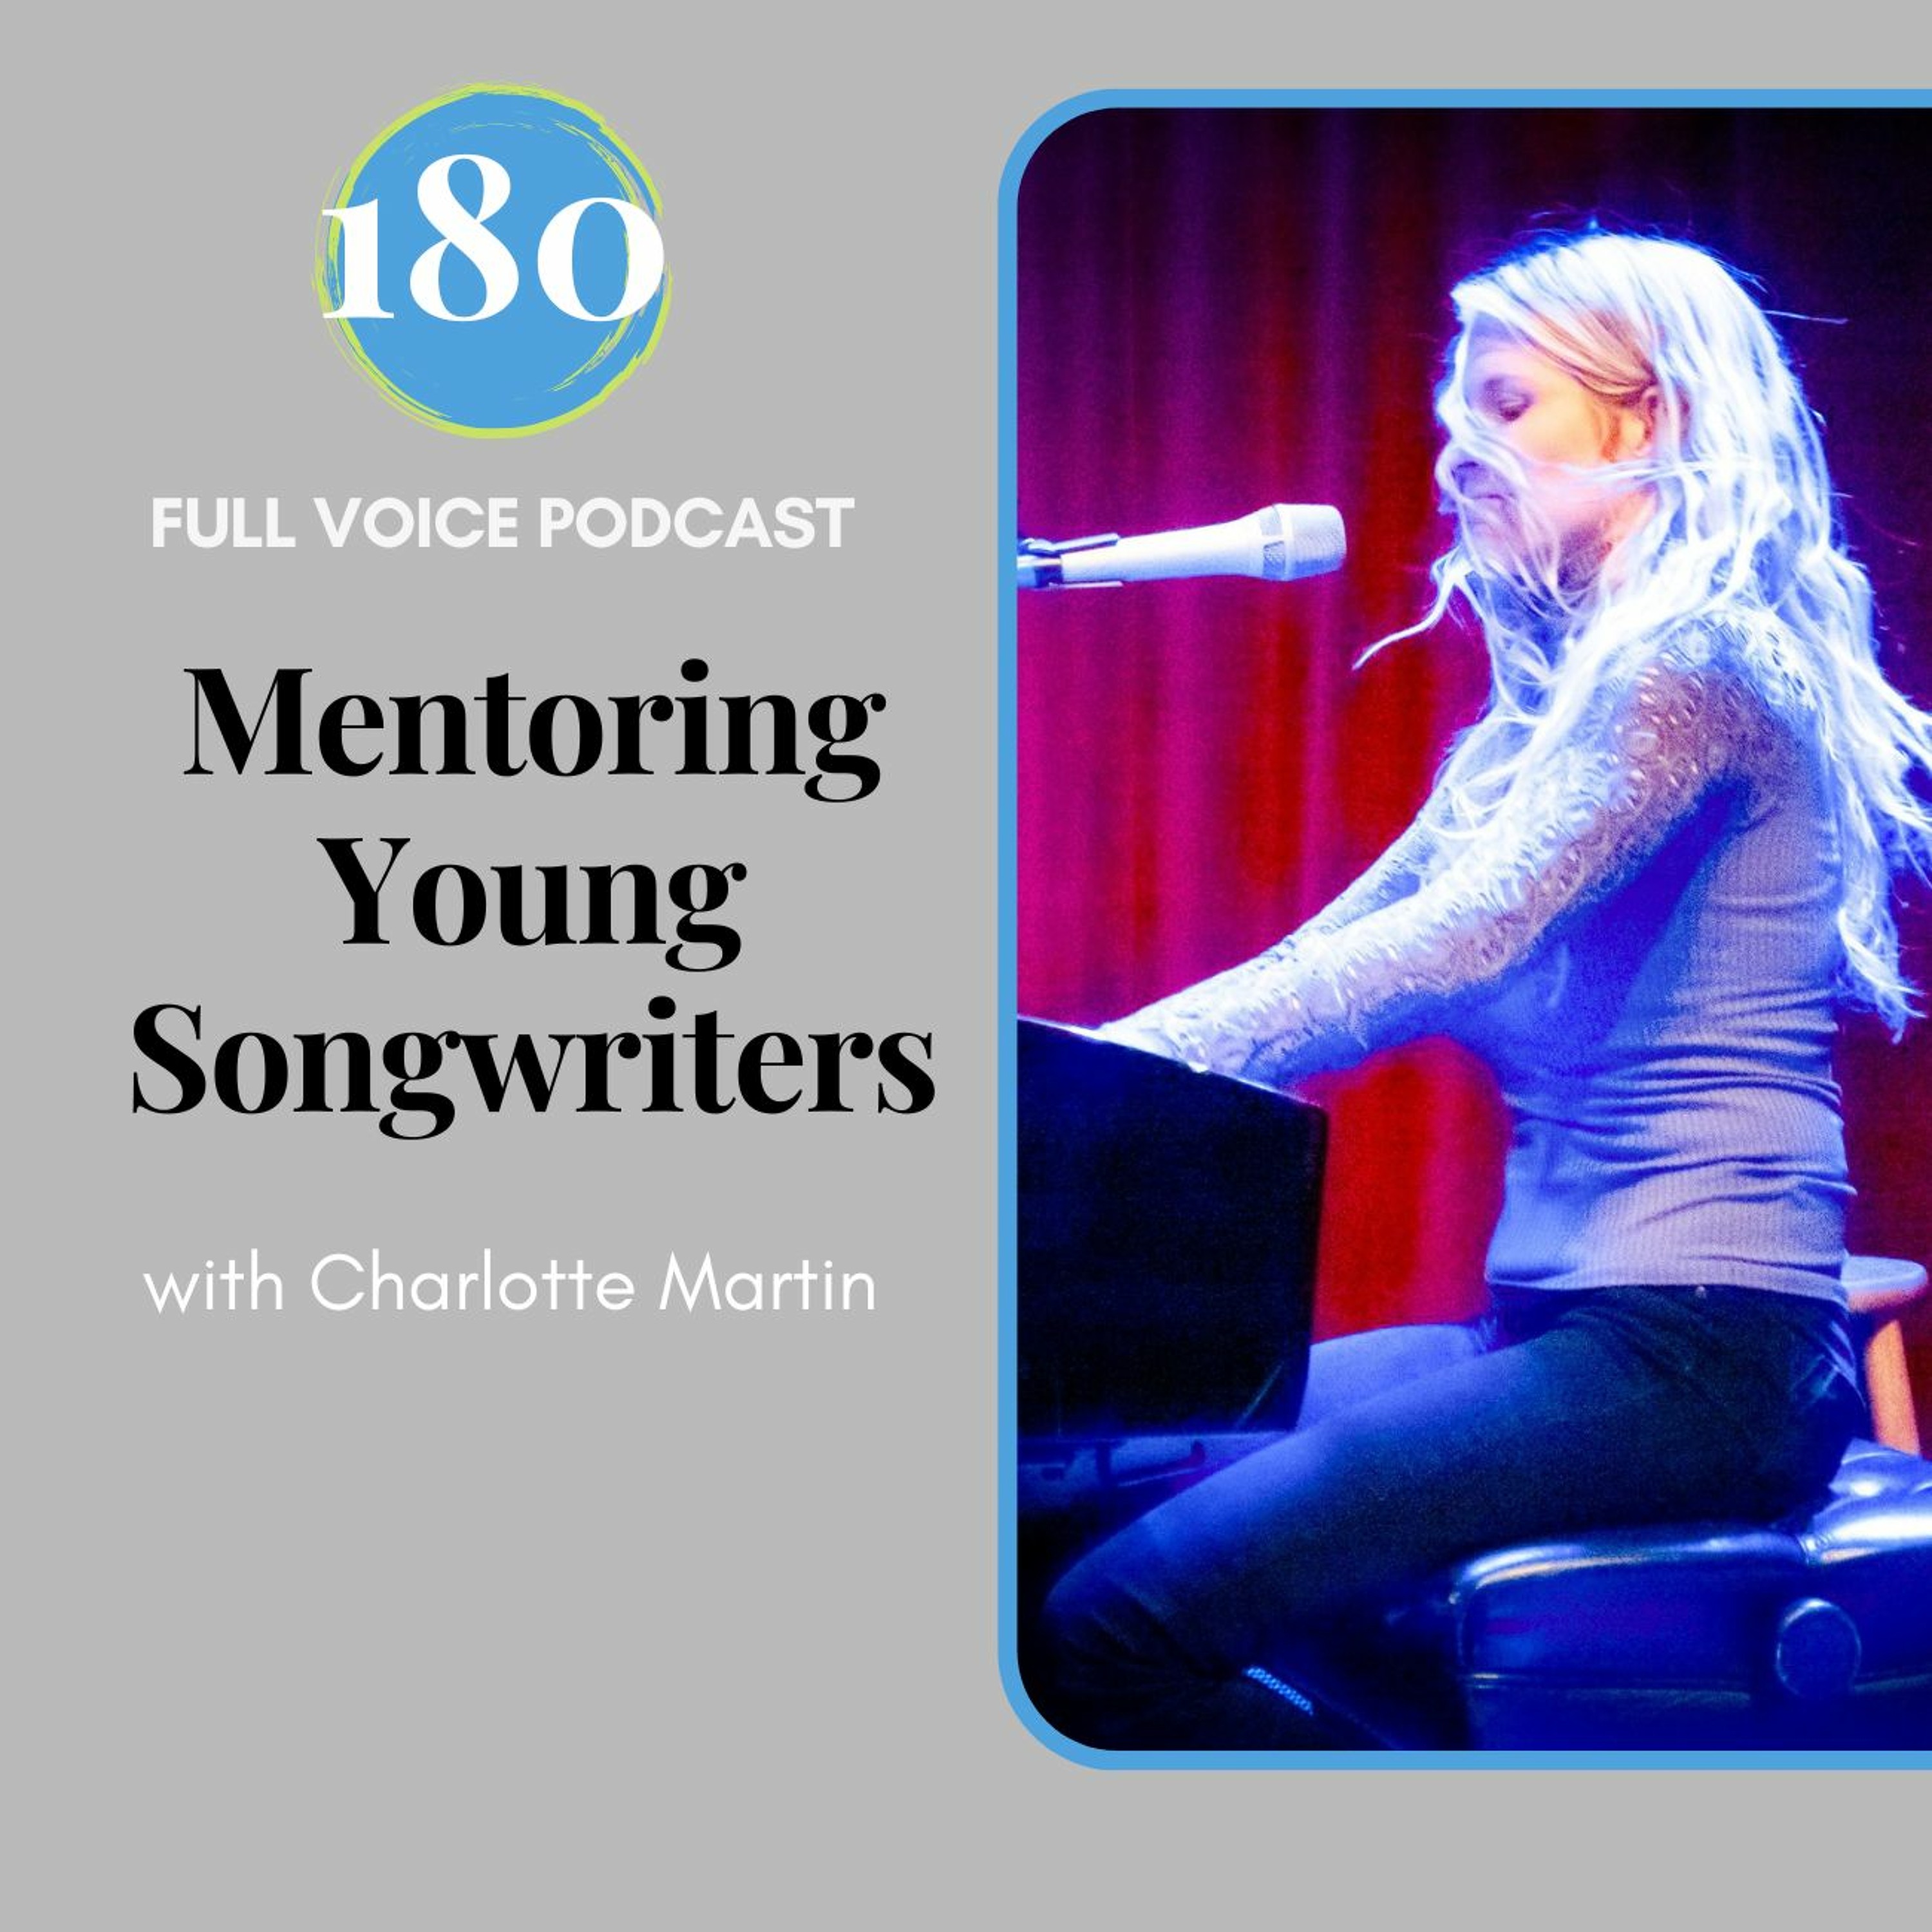 FVPC #180 Mentoring Young Songwriters with Charlotte Martin